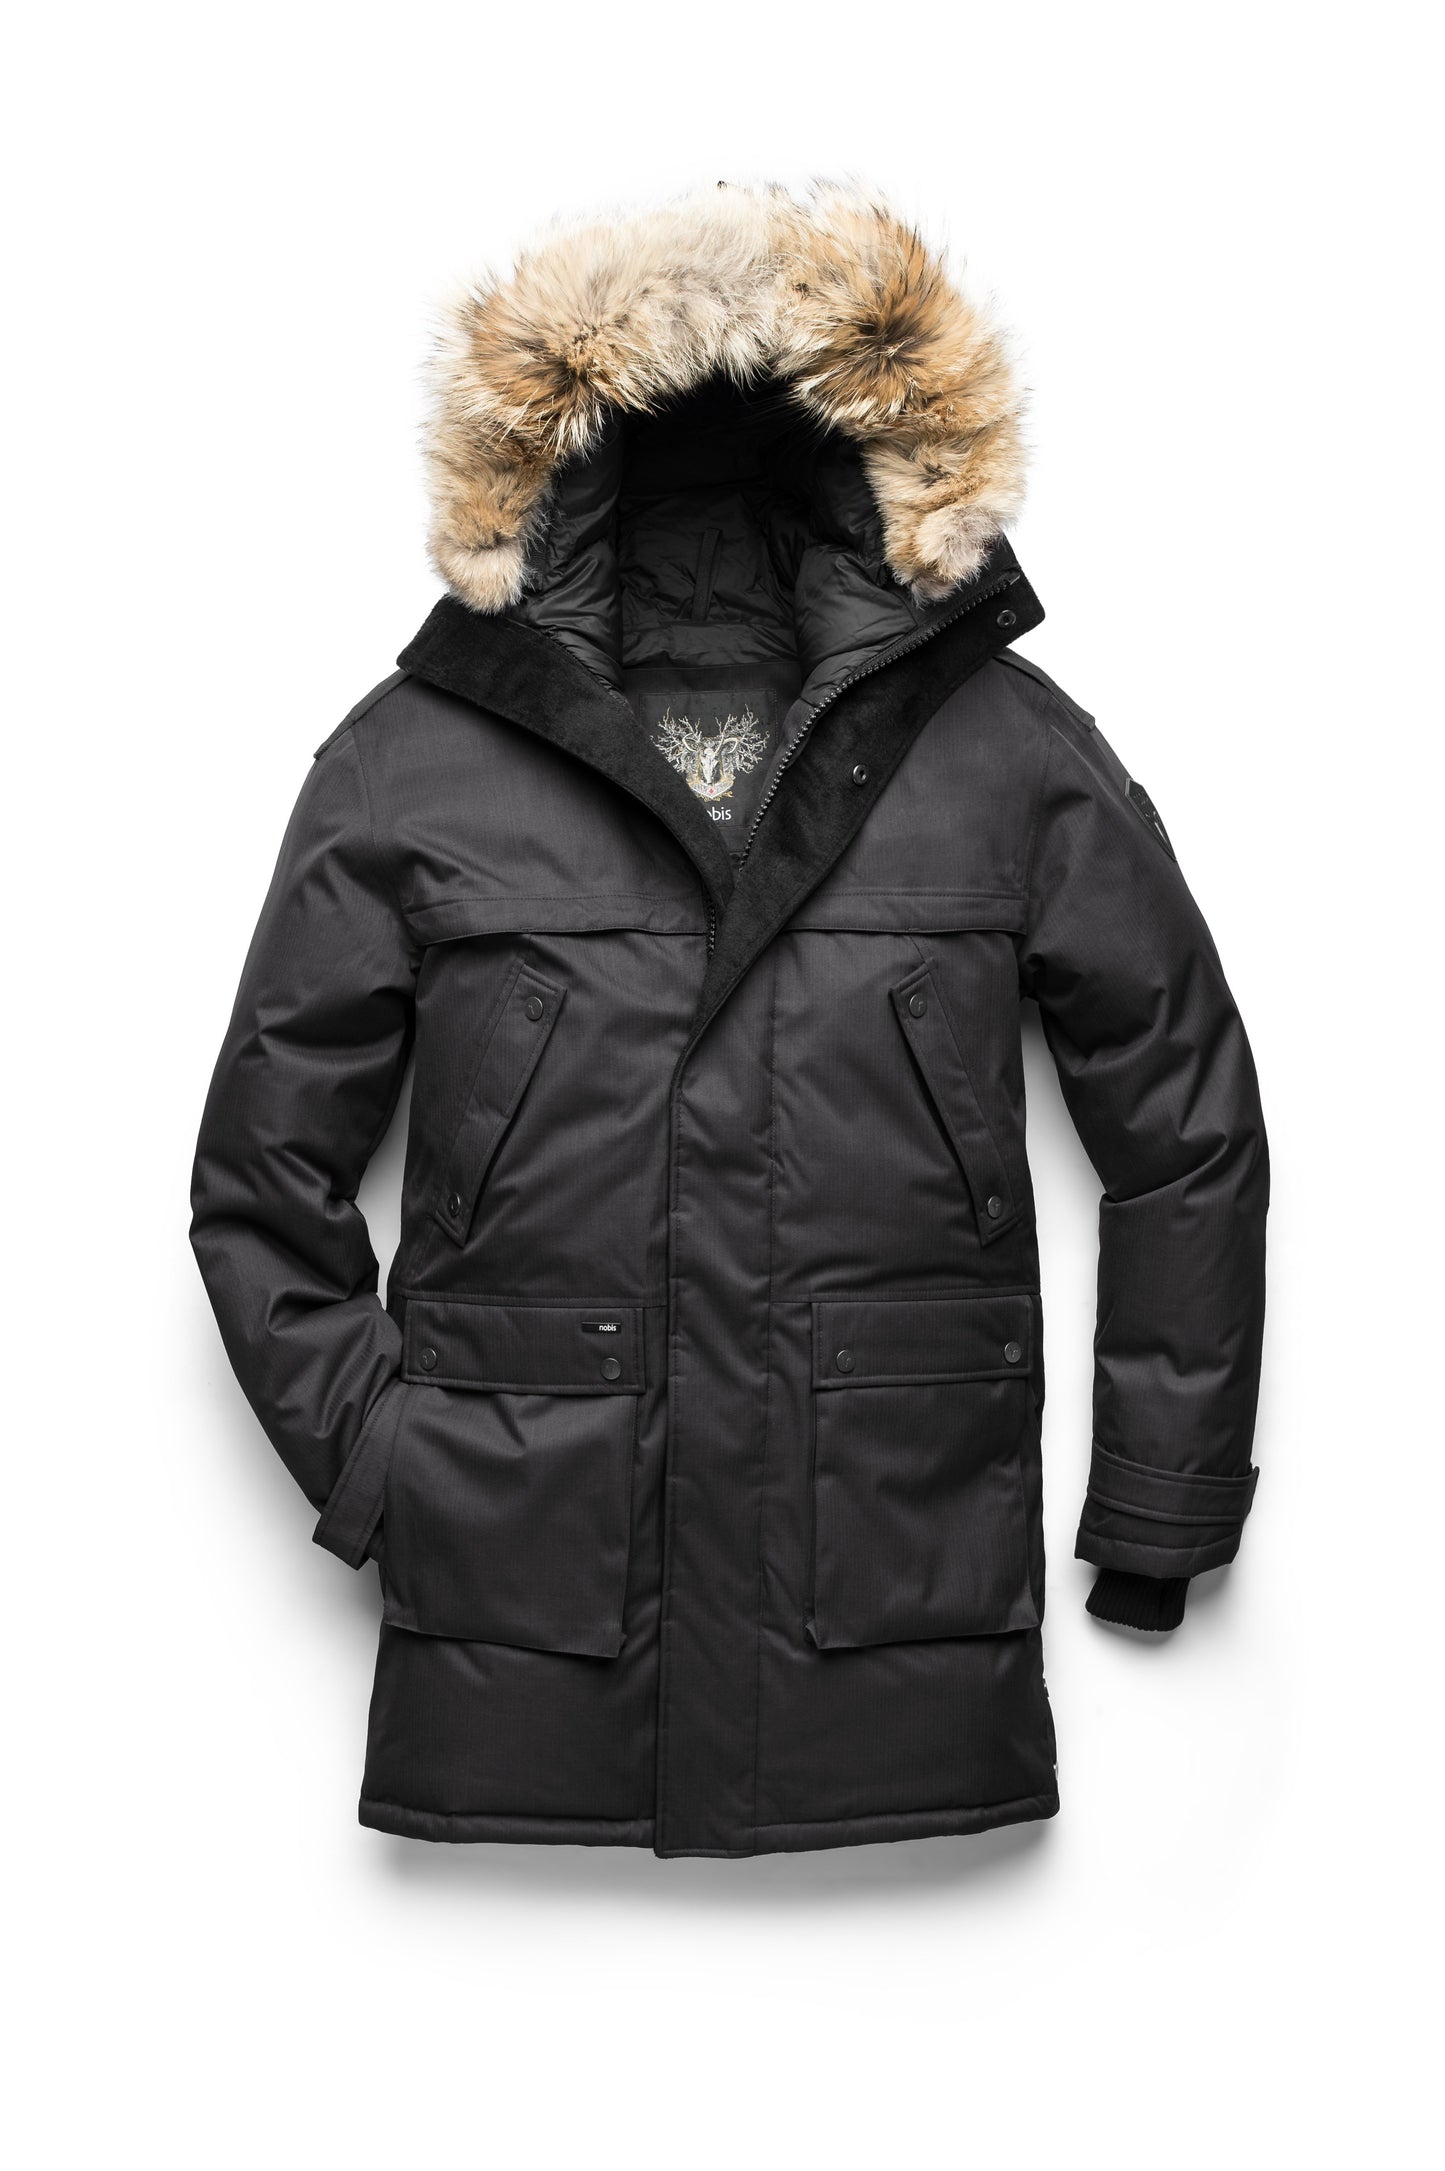 Men's Best Selling Parka the Yatesy is a down filled jacket with a zipper closure and magnetic placket in CH Black